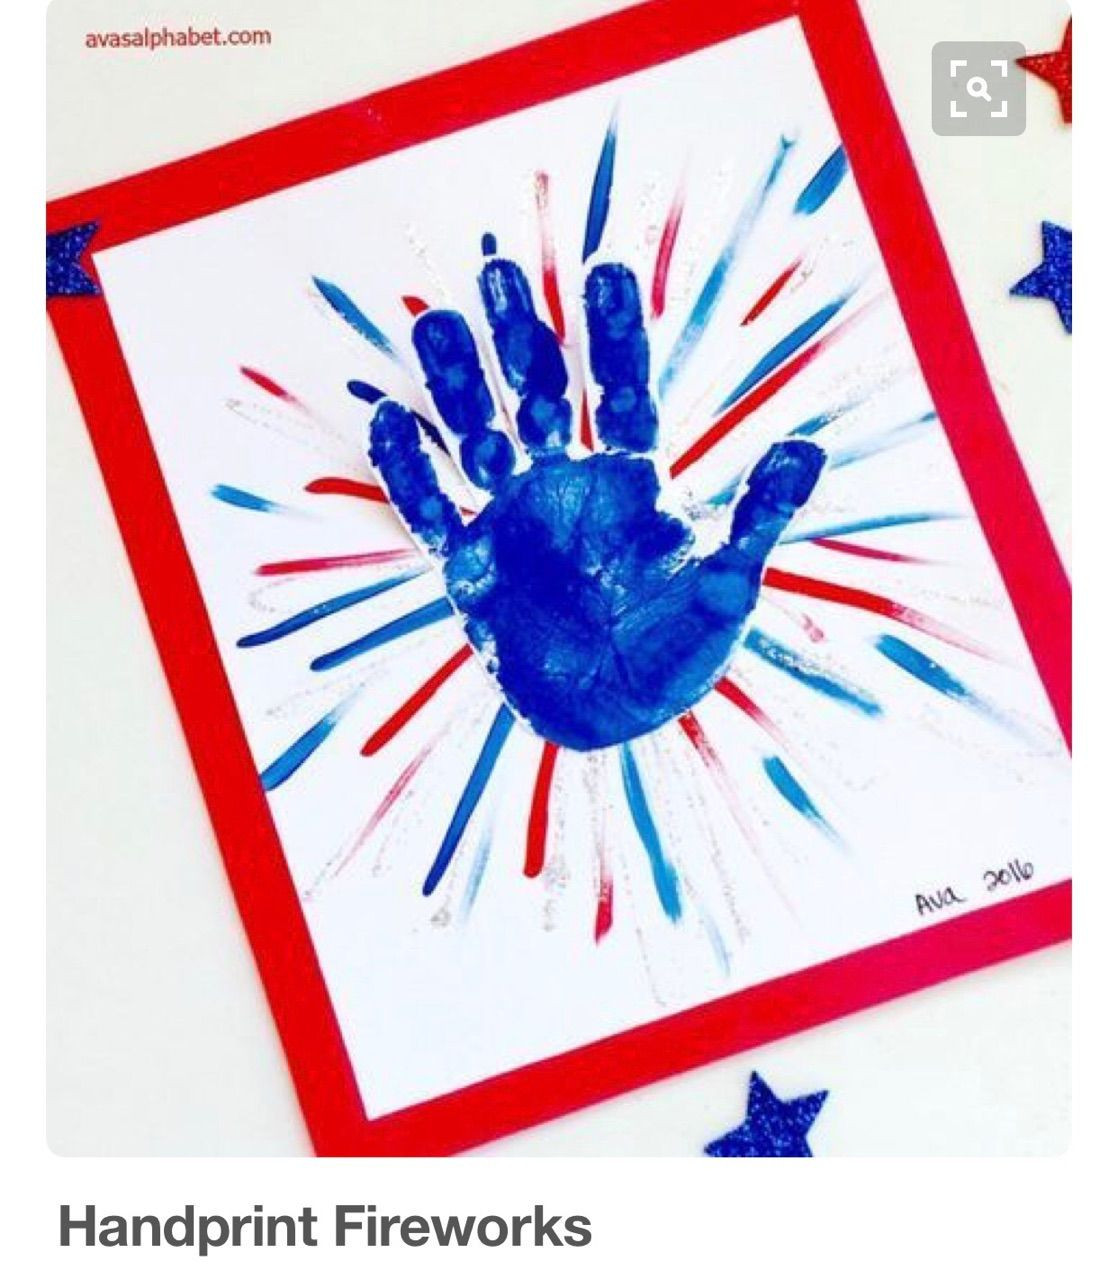 Memorial Day Craft For Preschool
 Easy Memorial Day Crafts Ideas for Kids Toddlers Adults